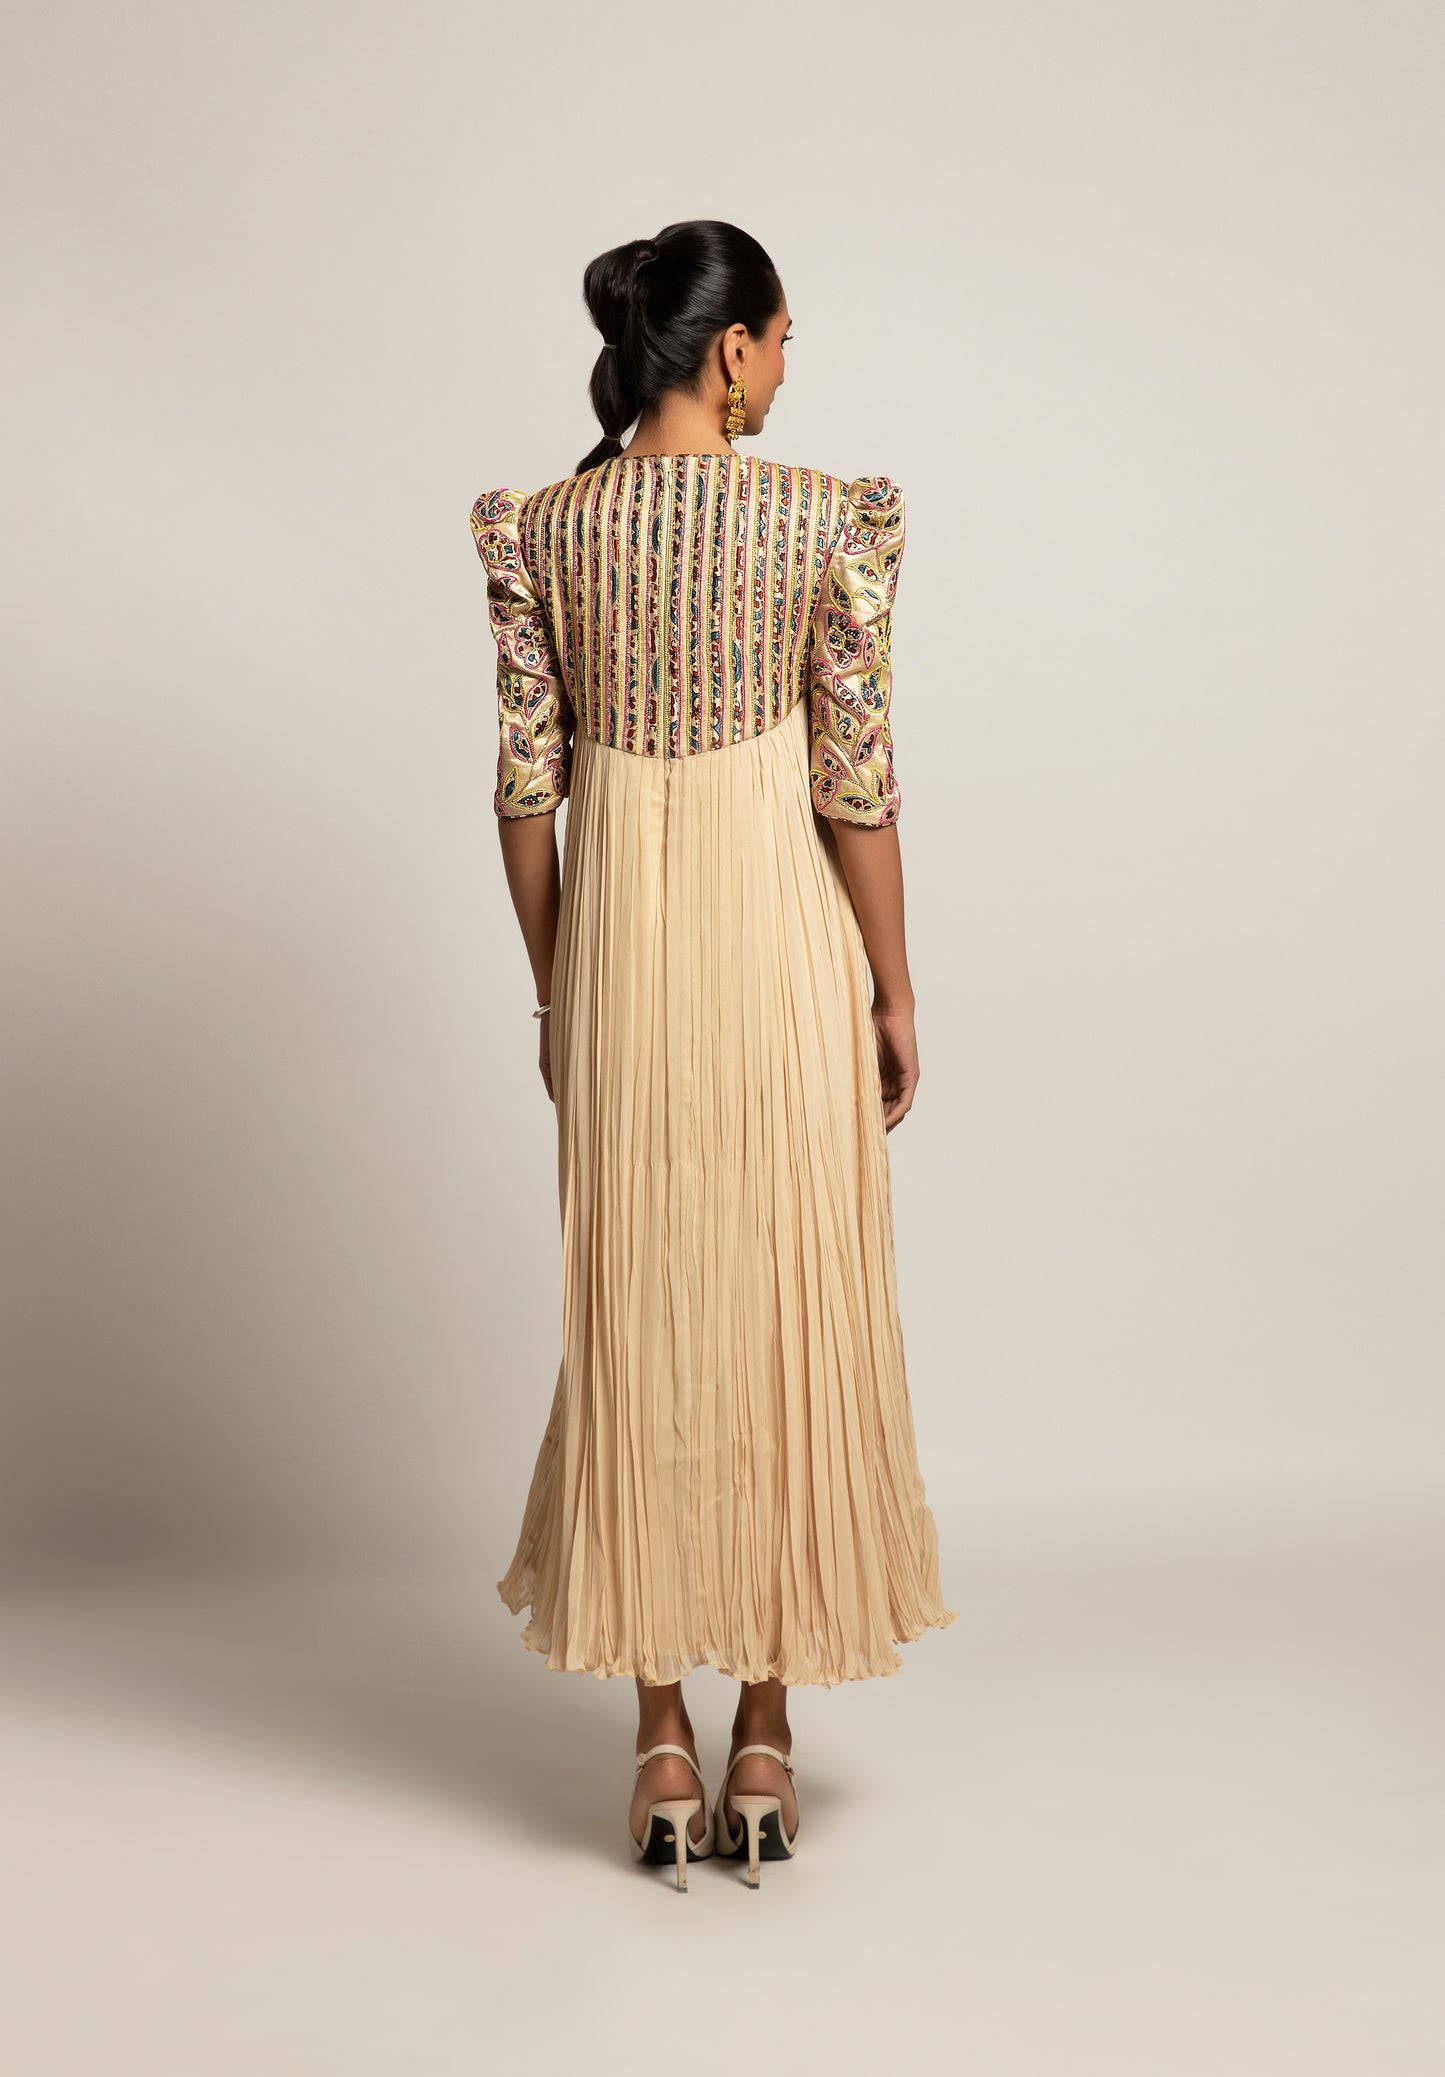 Beige Embroidered Gathered Dress